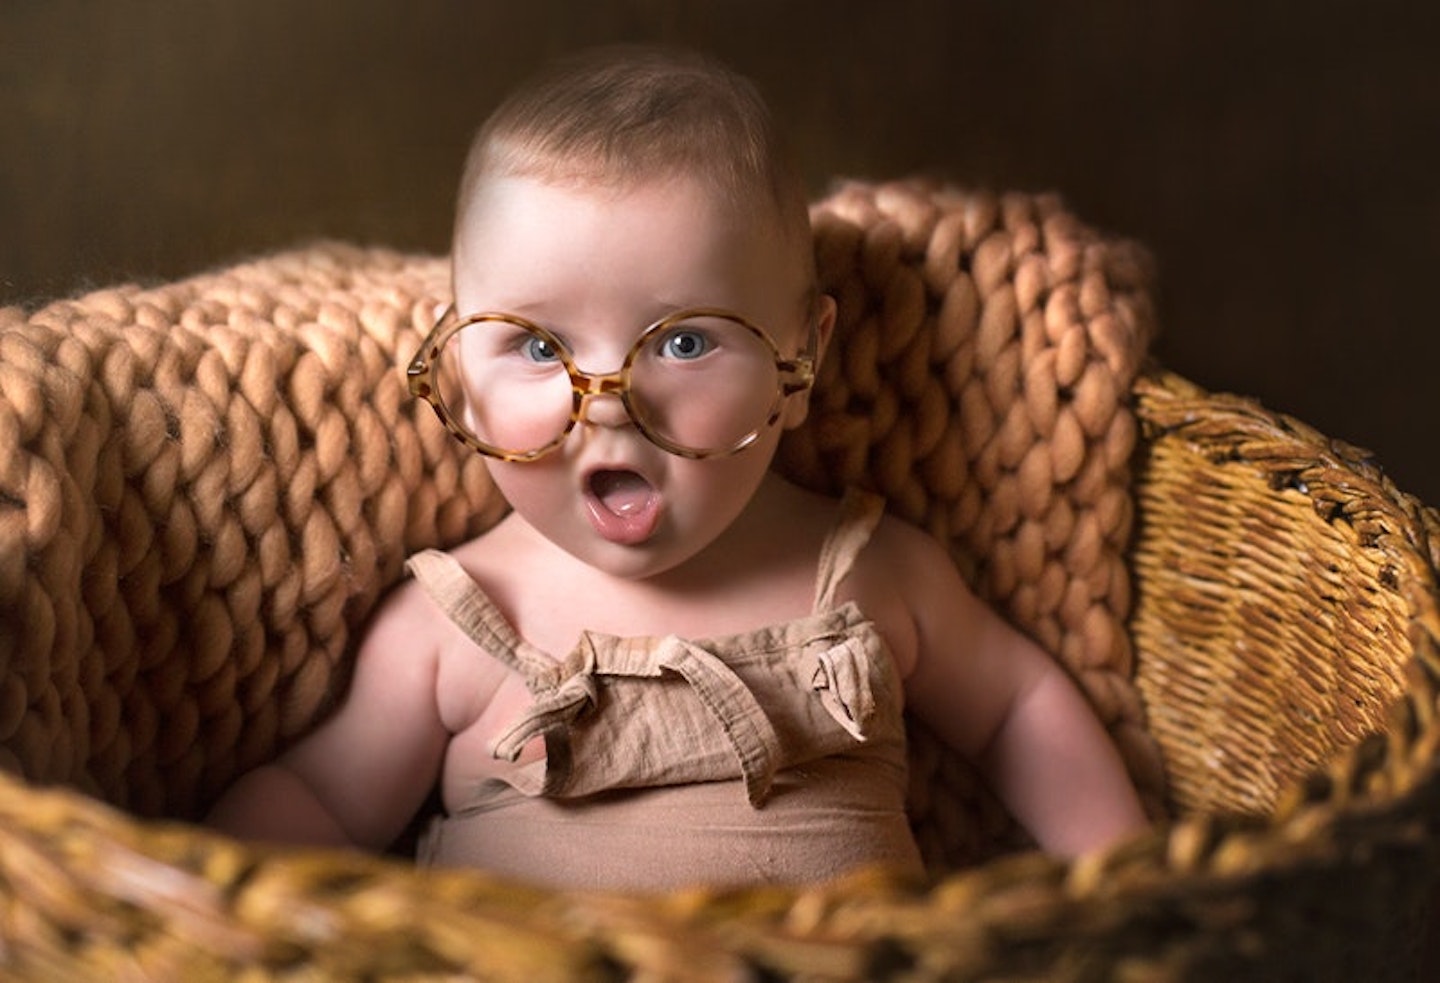 10 Beautiful Baby Boy Names Beginning With The Letter B - everymum